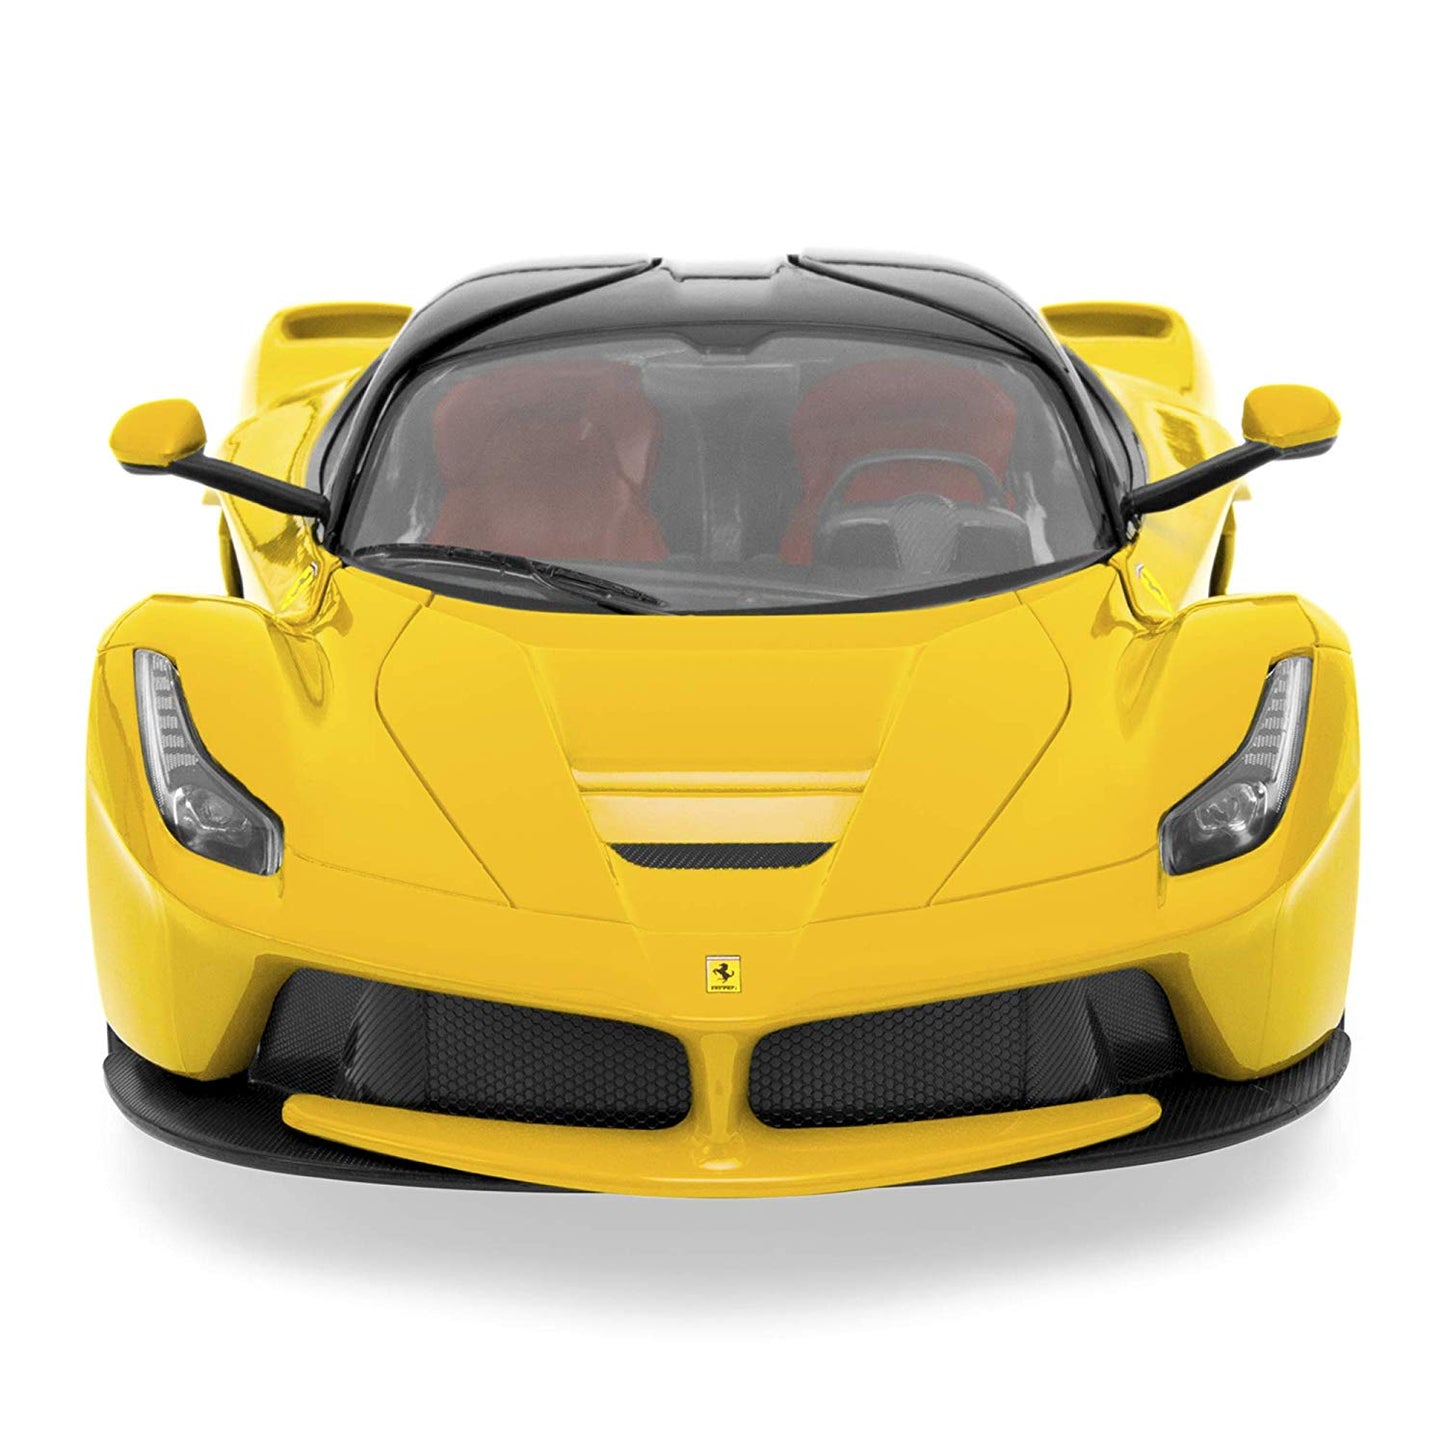 27 MHz 1/14 Scale Kids Licensed Ferrari Model Remote Control Play Toy Car w/ Functioning Headlights, Taillights, Doors, 5.1 MPH Max Speed